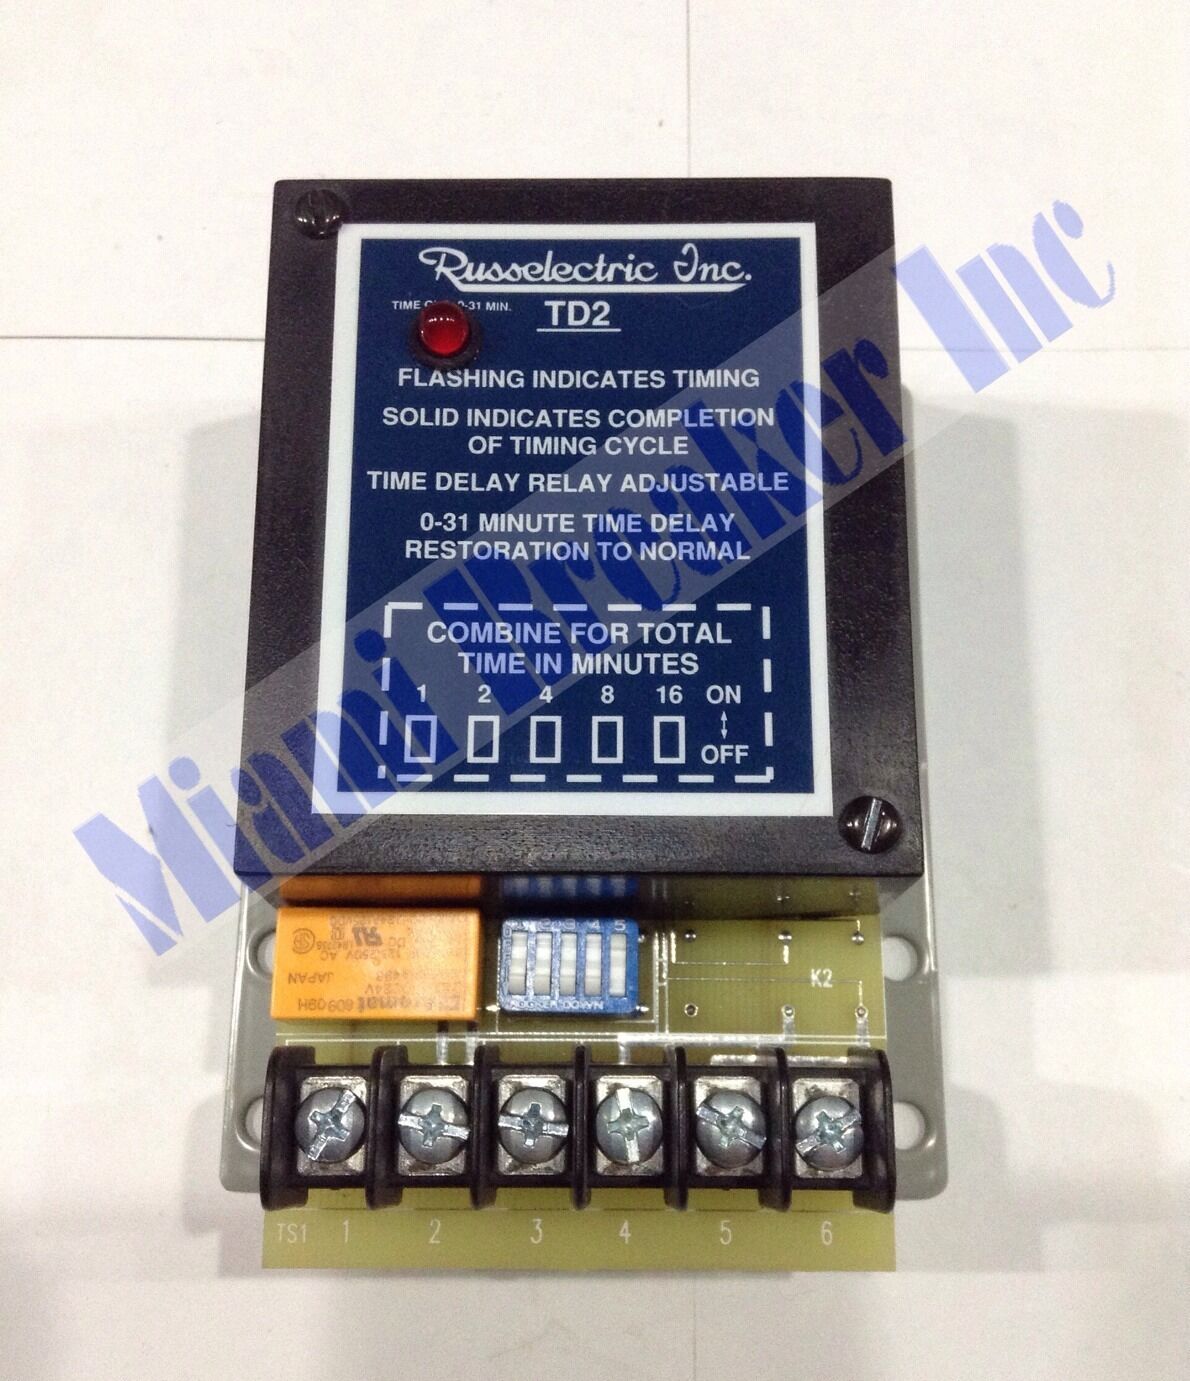 TD2 Russelectric INC. Time Delay Relay Adjustable 0-31 Minutes